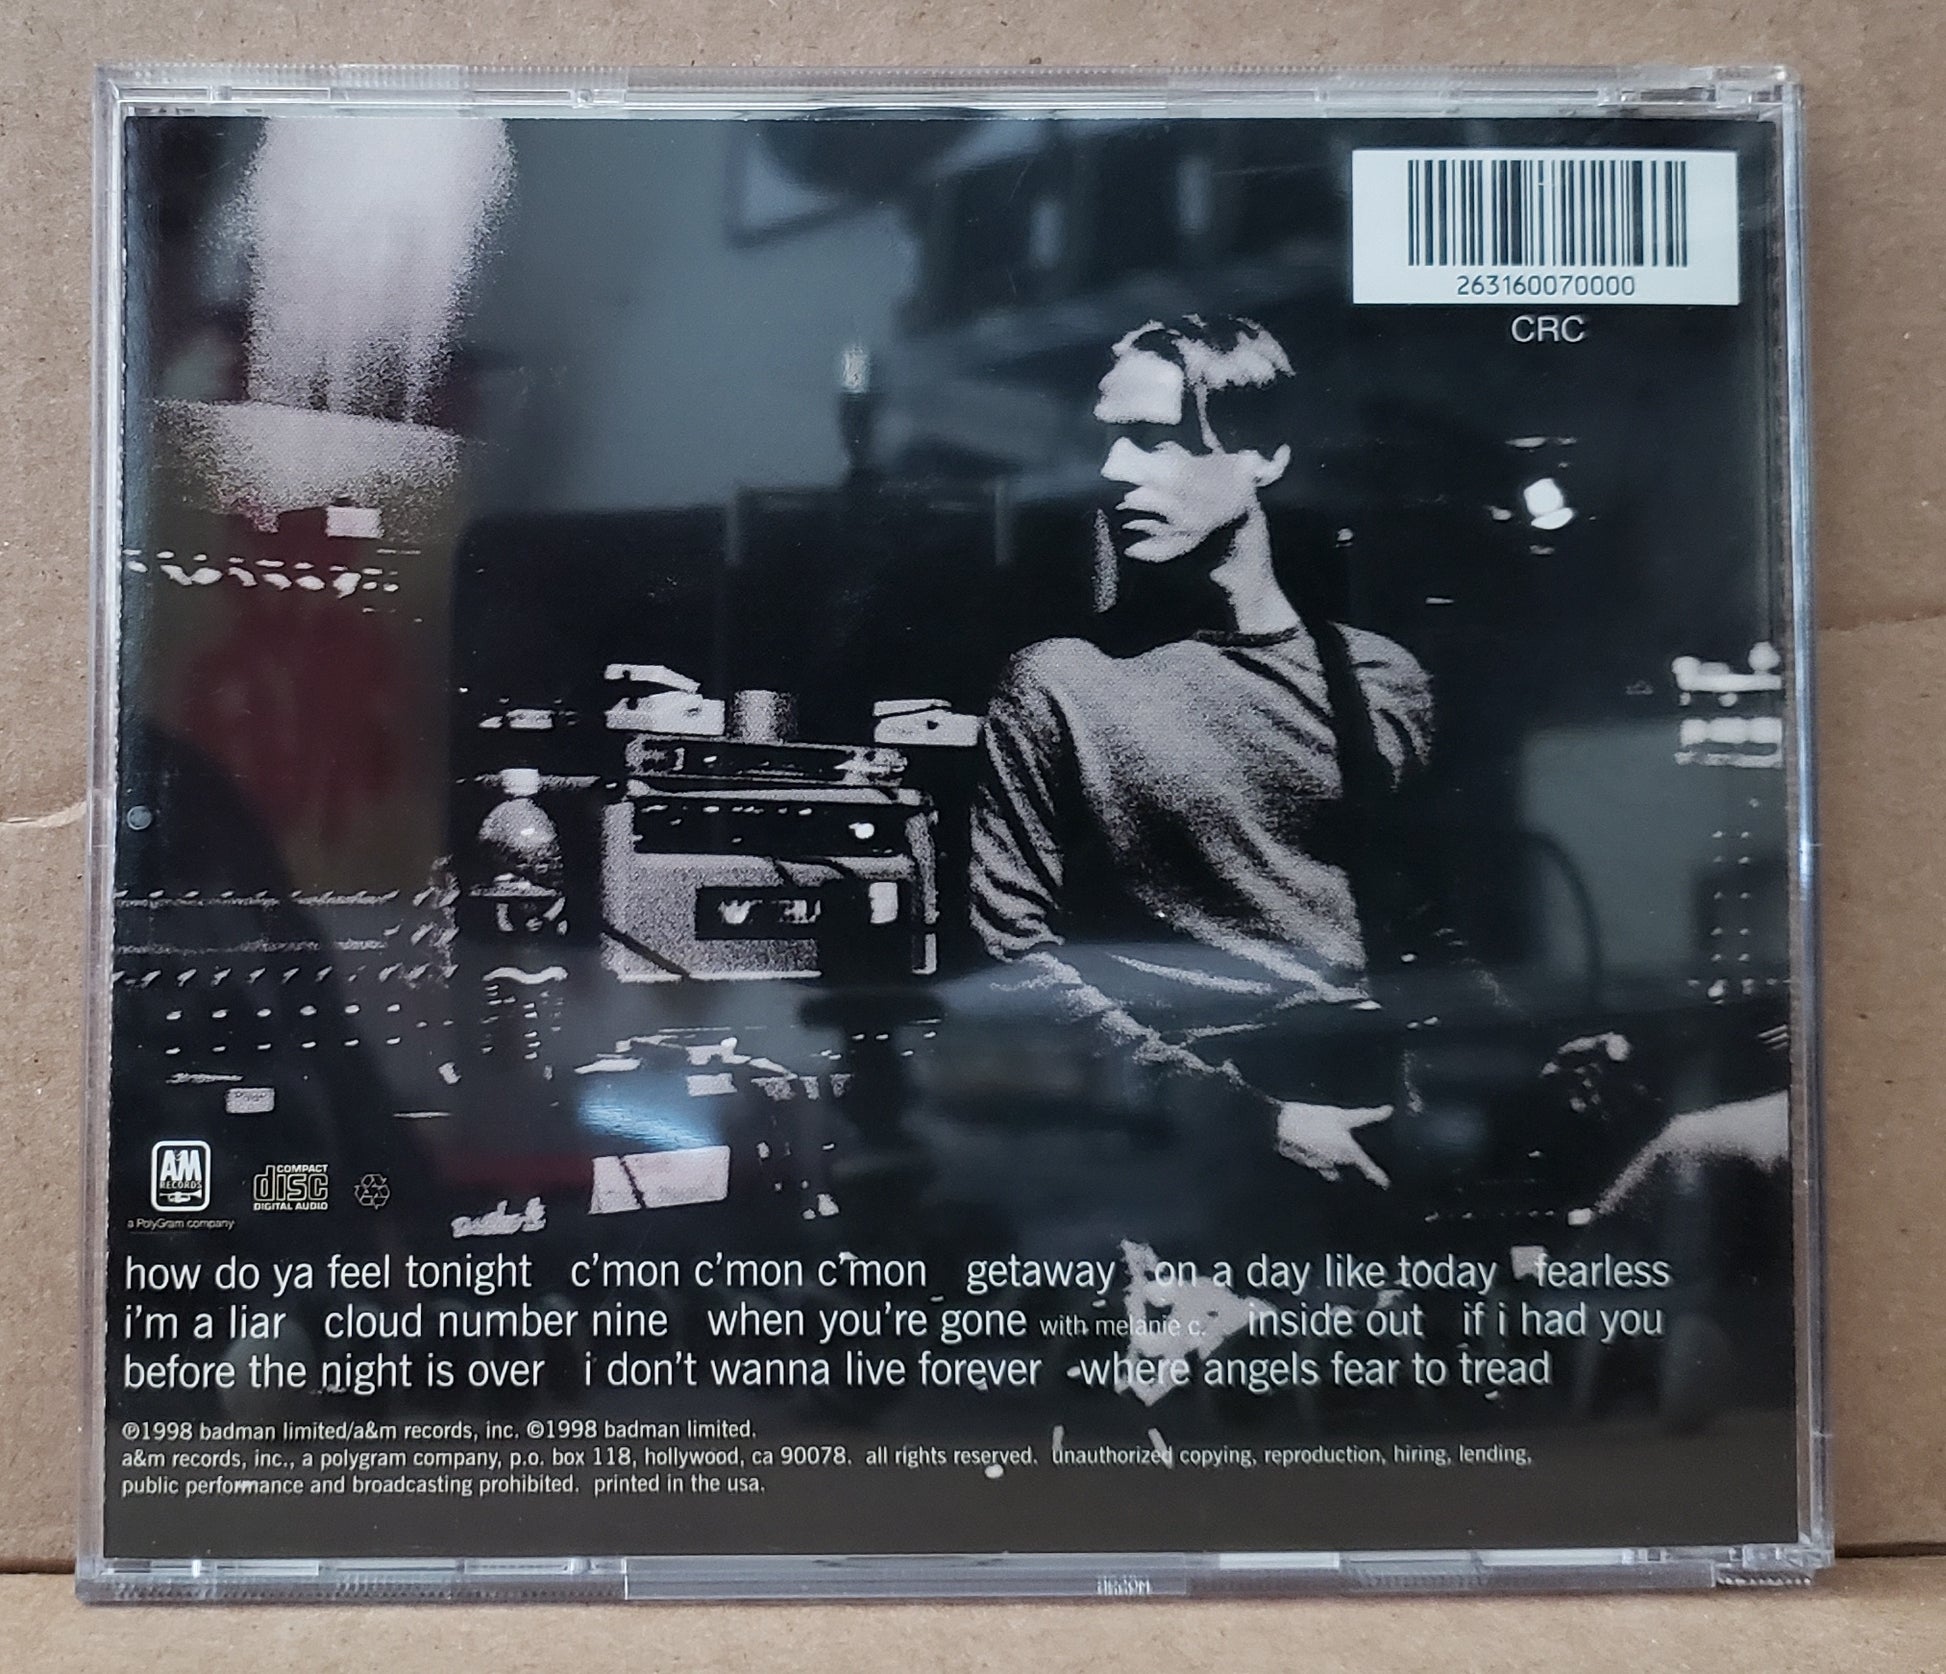 Bryan Adams - On a Day Like Today [1998 Club Edition] [Used CD]